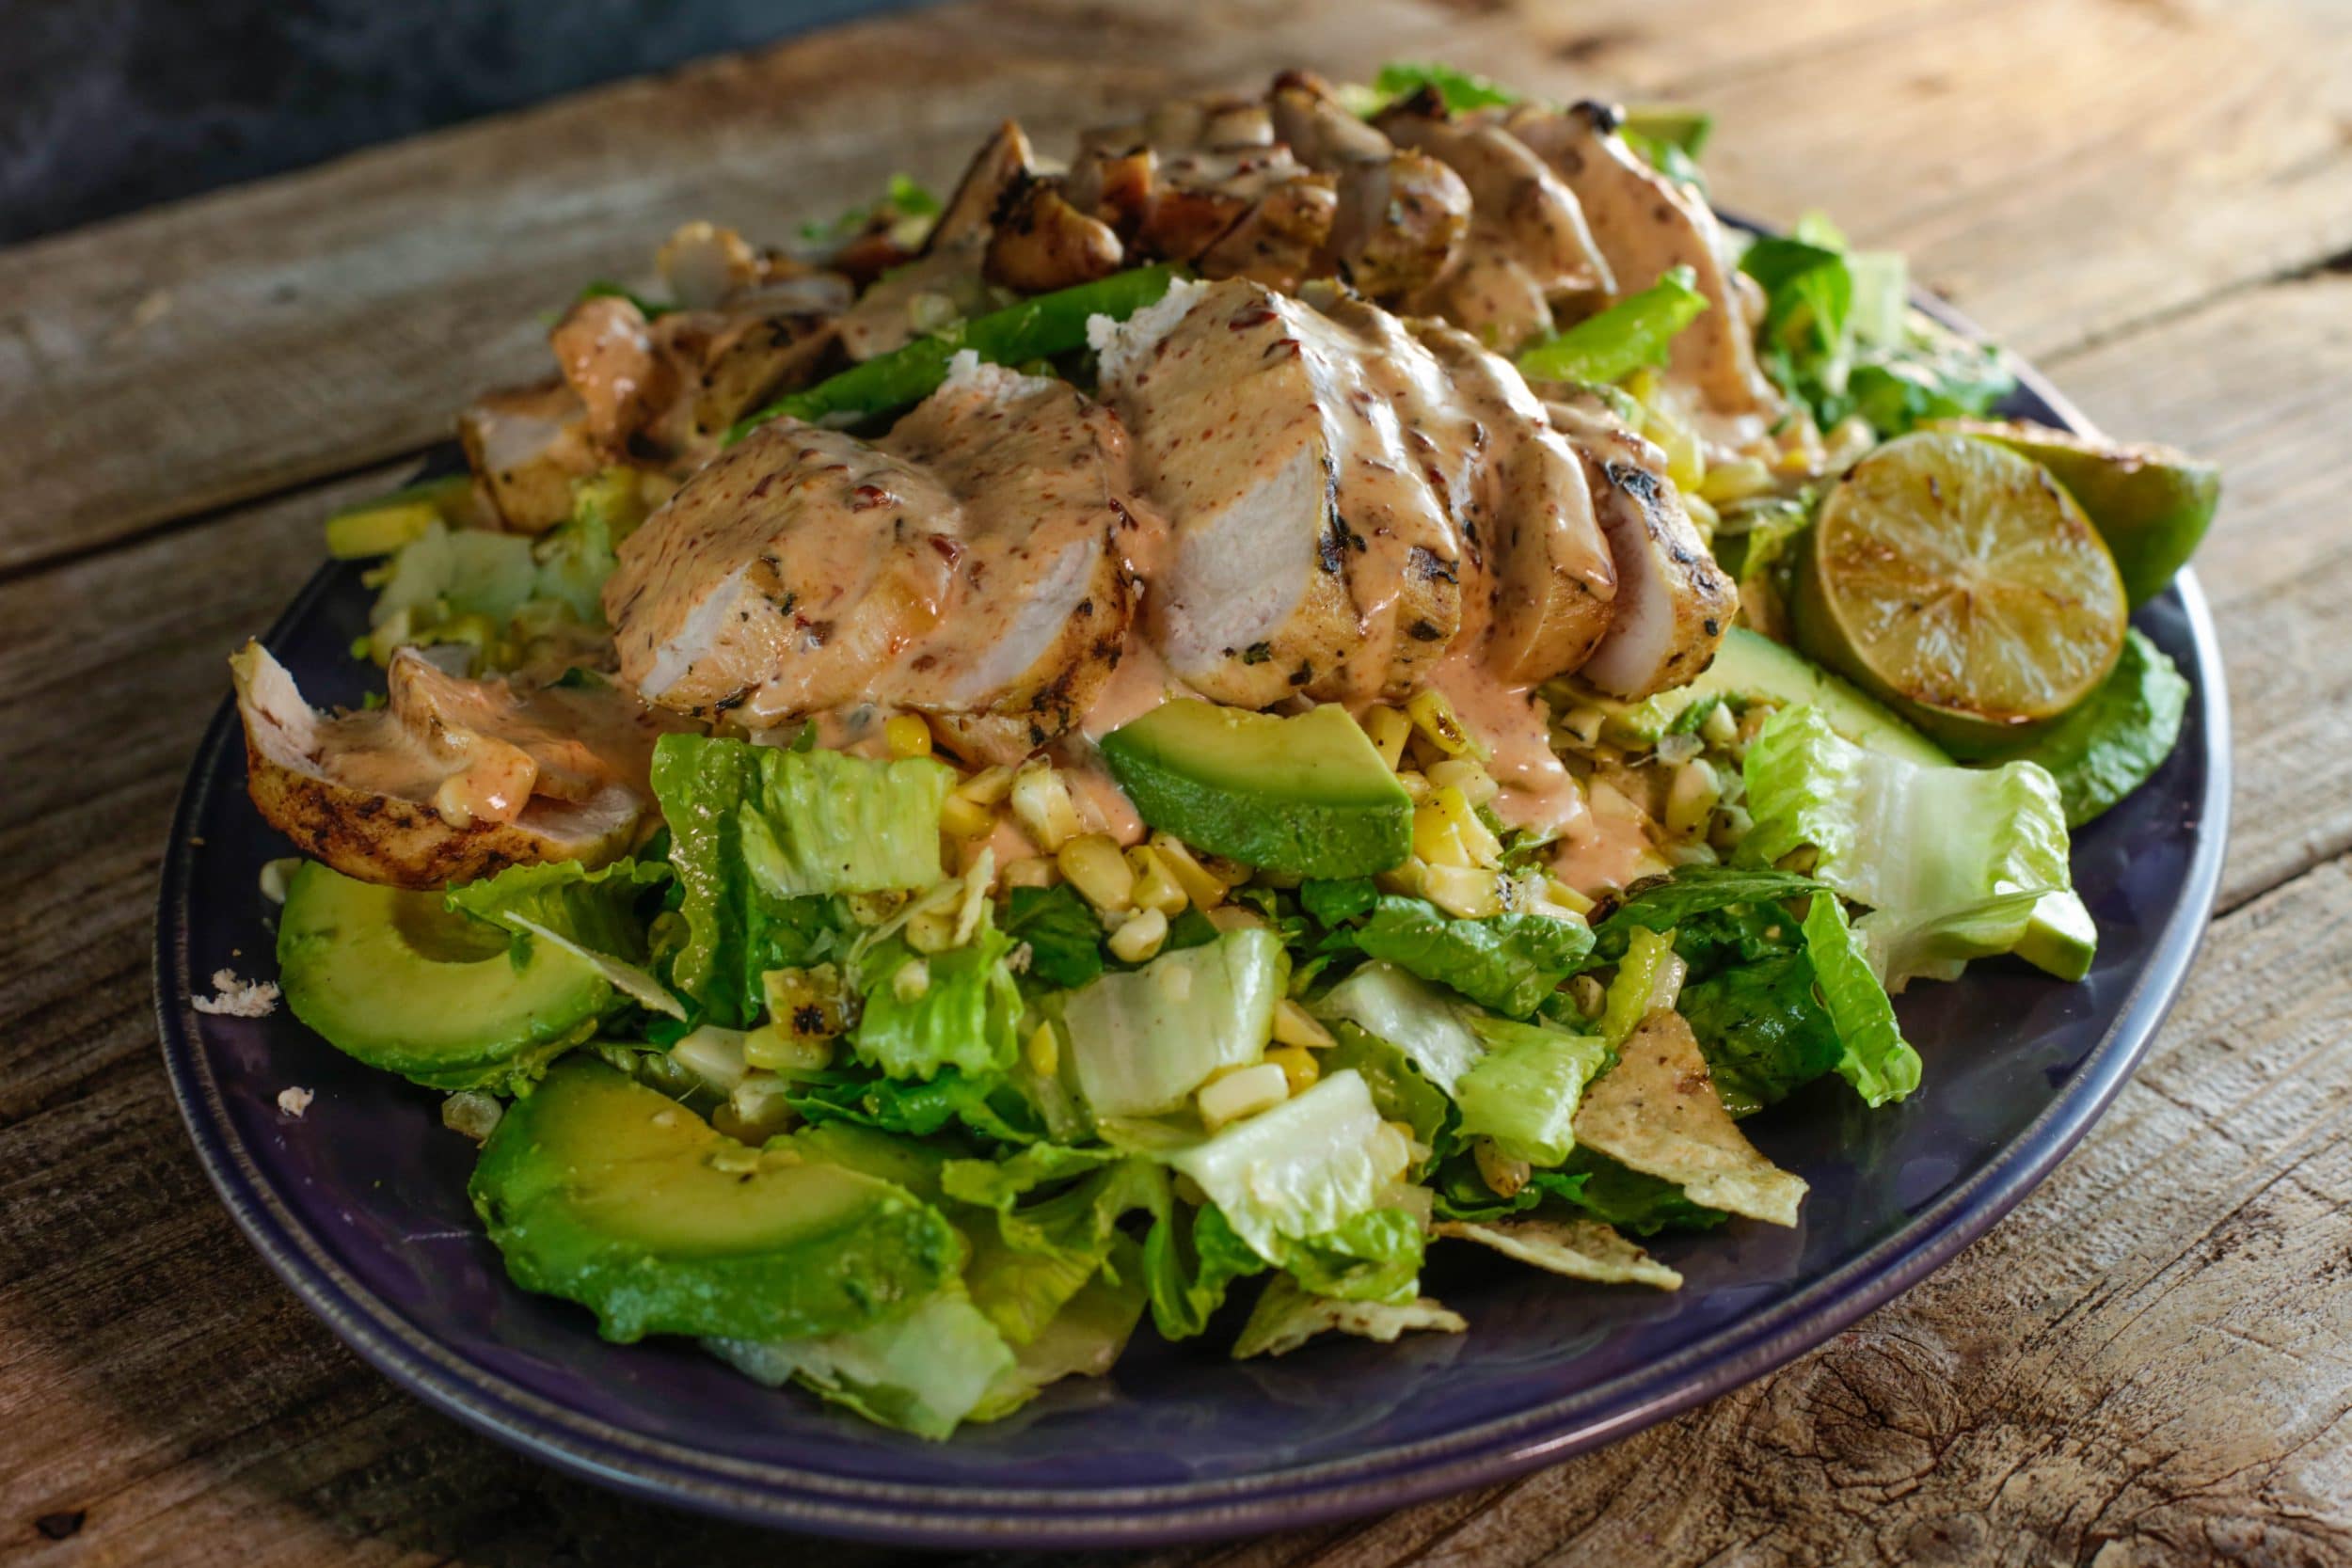 Grilled Chicken and Corn Salad with Chipotle Crema